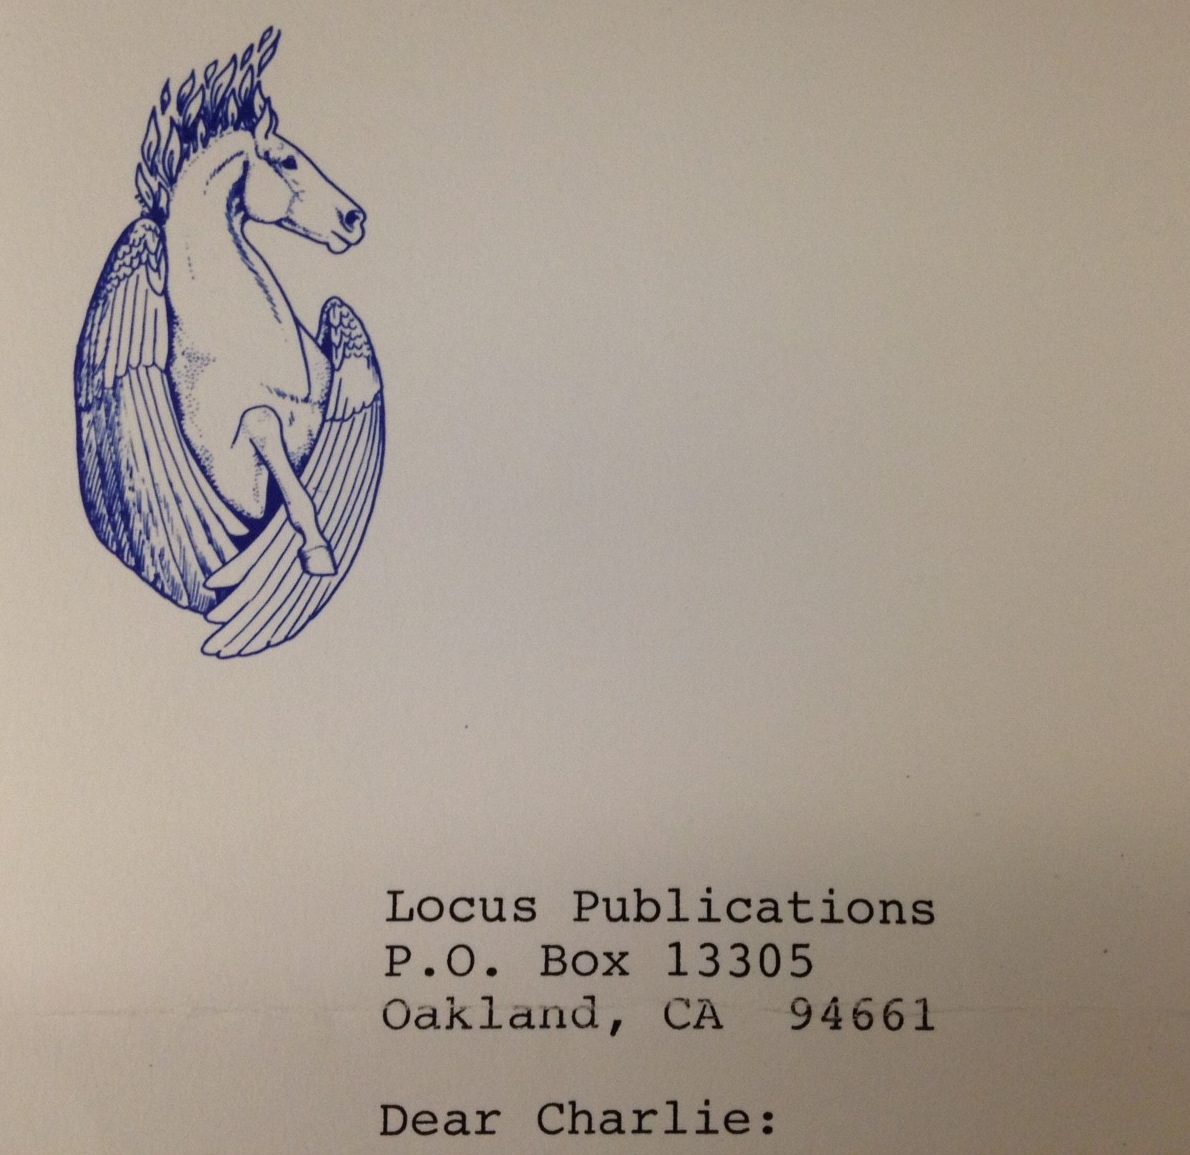 Winged horse with a flaming mane printed on stationary.